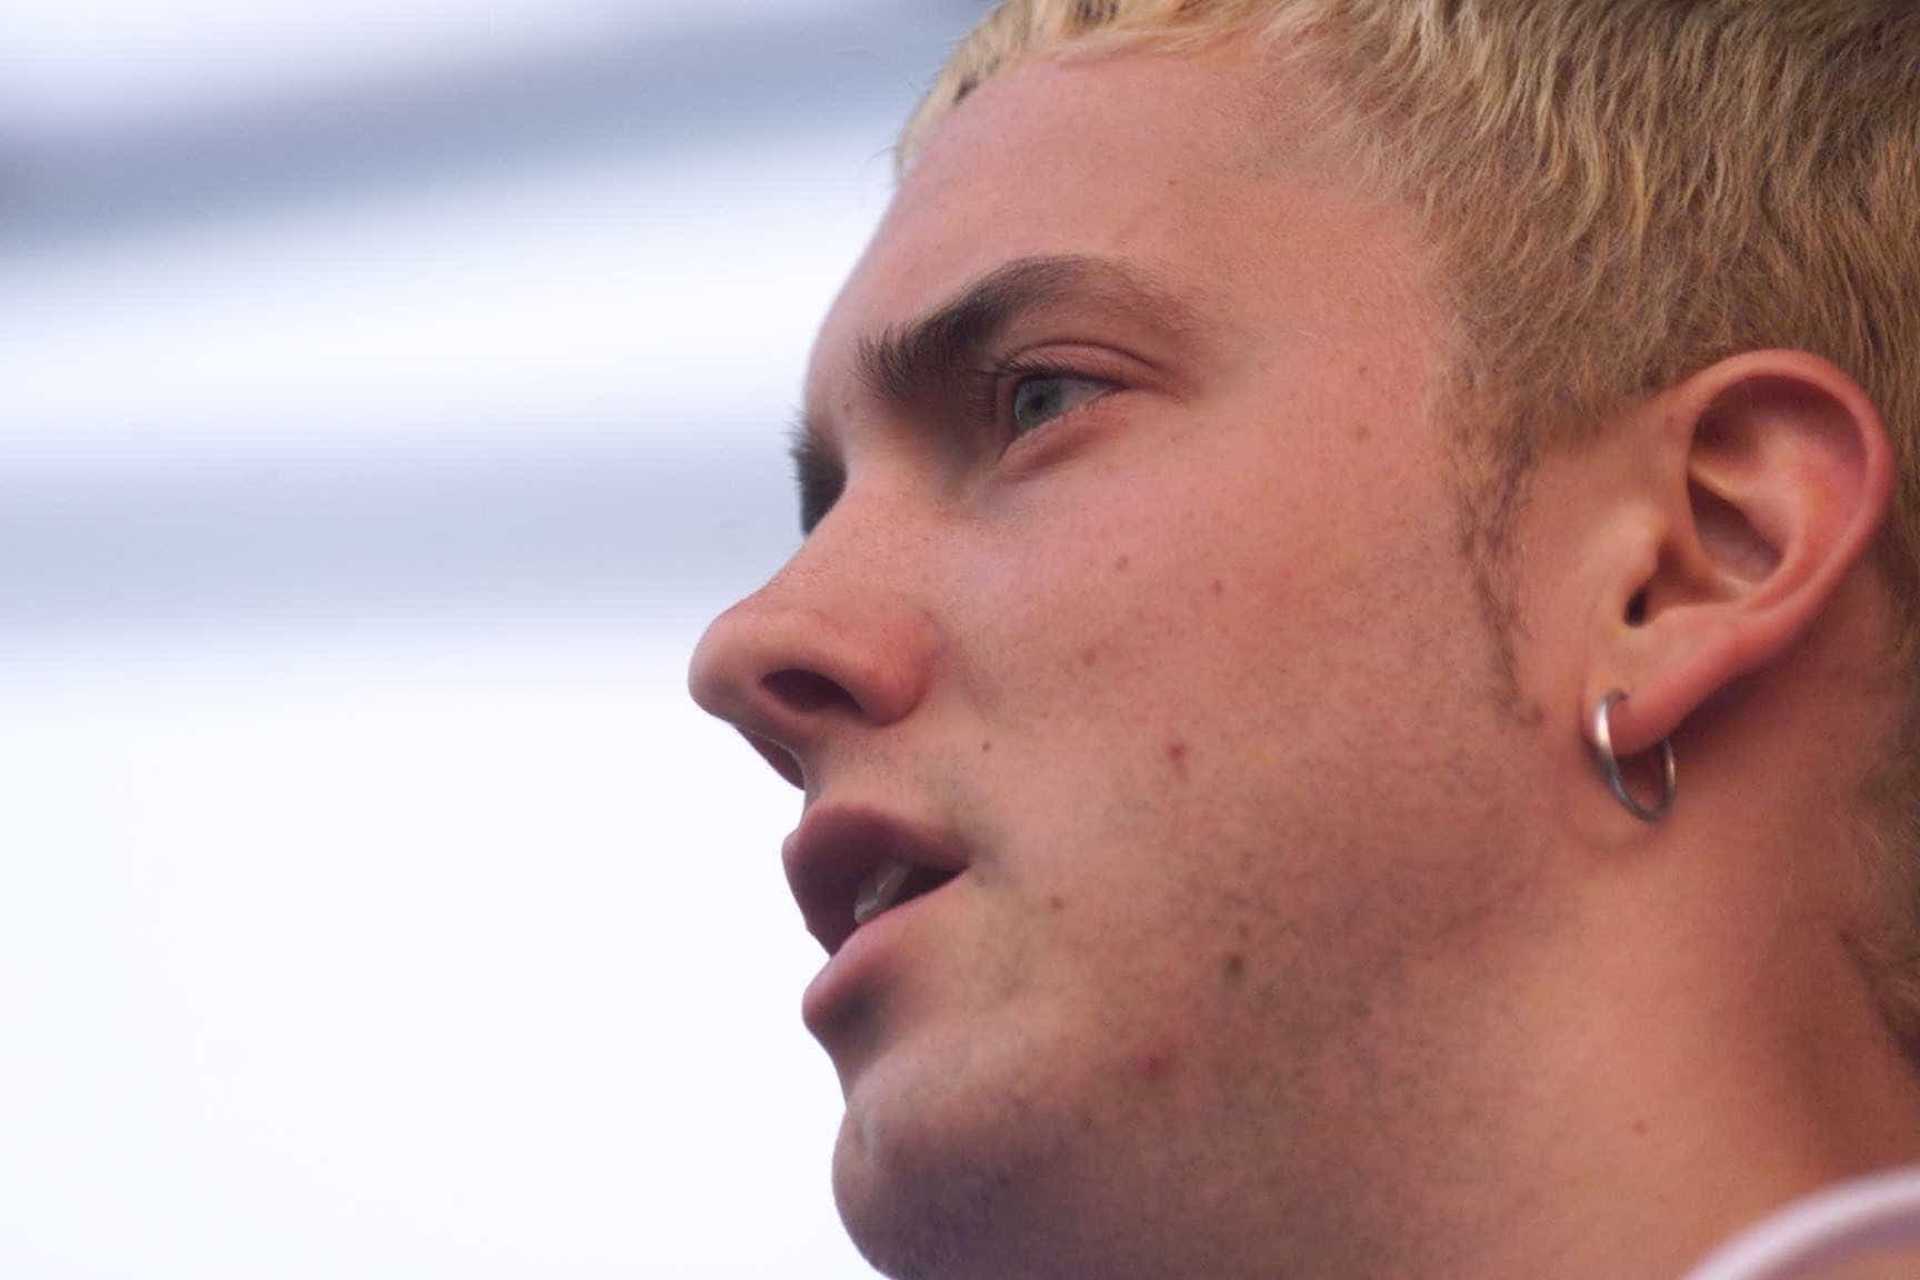 Download Wallpaper Human, Rapper, Nose, The Real Slim Shady